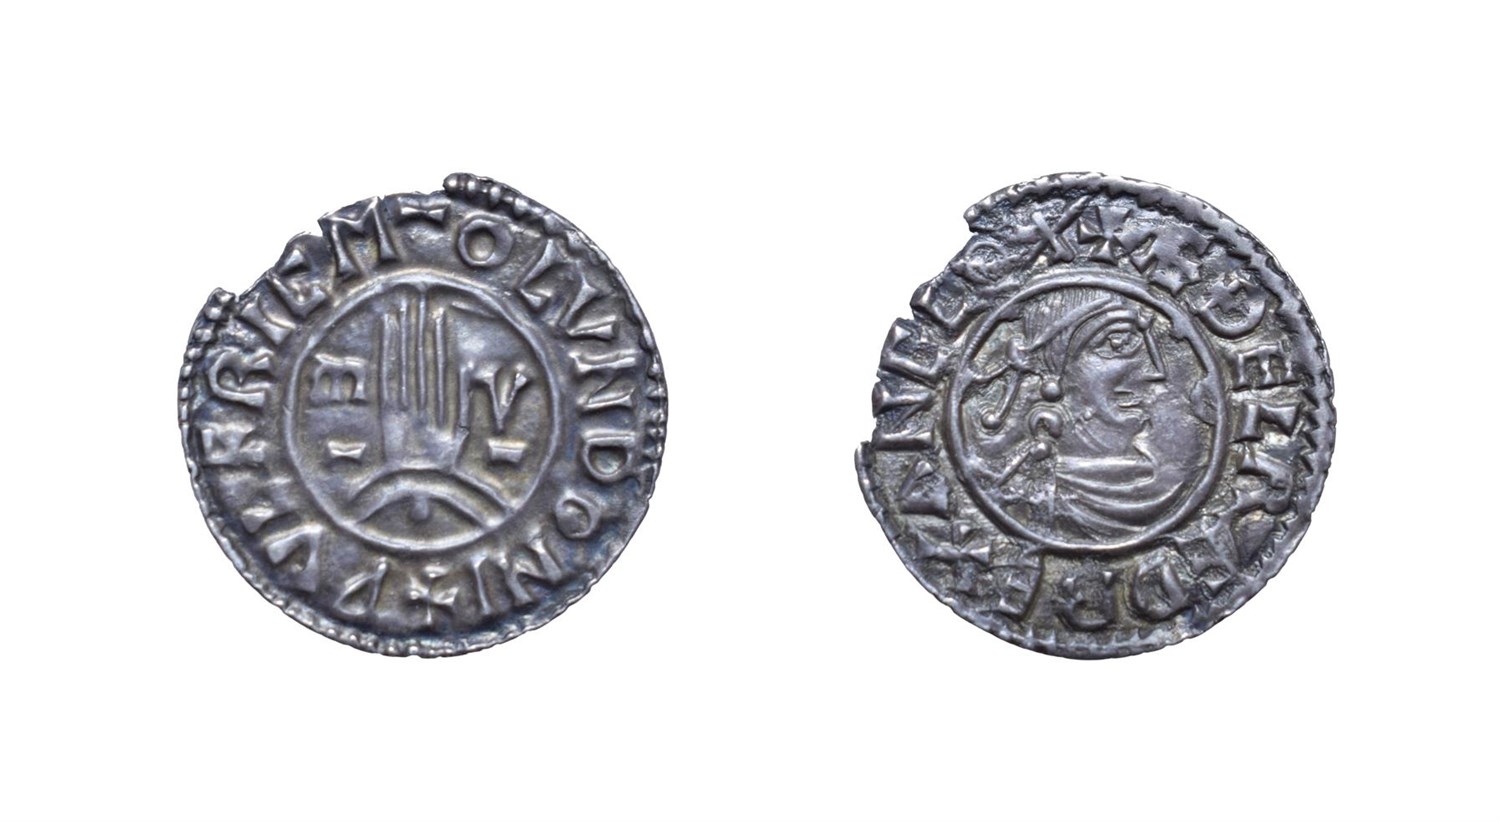 Lot 4032 - Aethelred II, 978 - 1016, London Mint Penny. 1.45g, 20.6mm, 9h. First hand type, Wulfric at London.